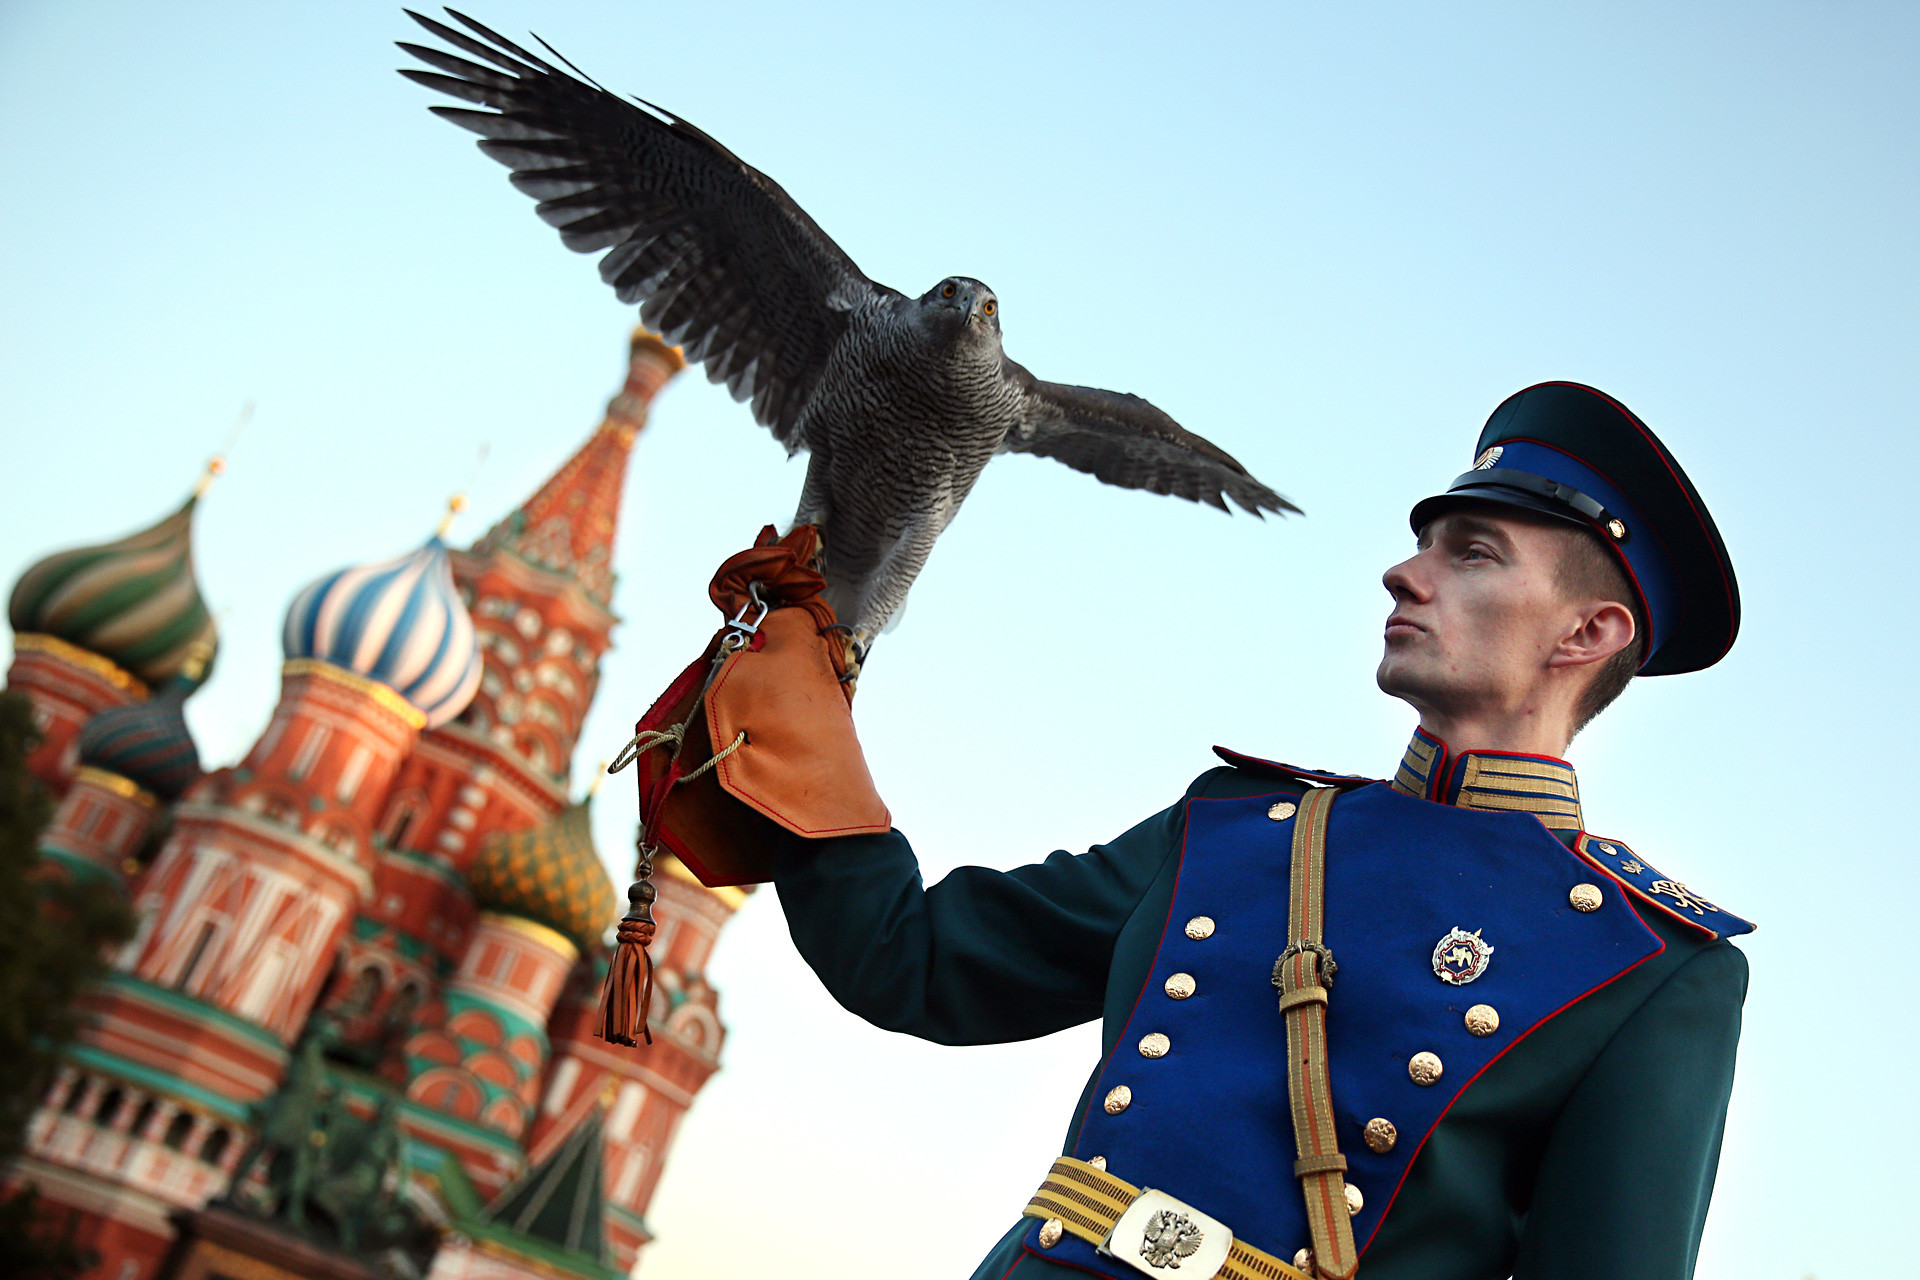 A member of the Kremlin ornithological service at the closing ceremony of the Spasskaya Tower International Military Music Festival on Red Square